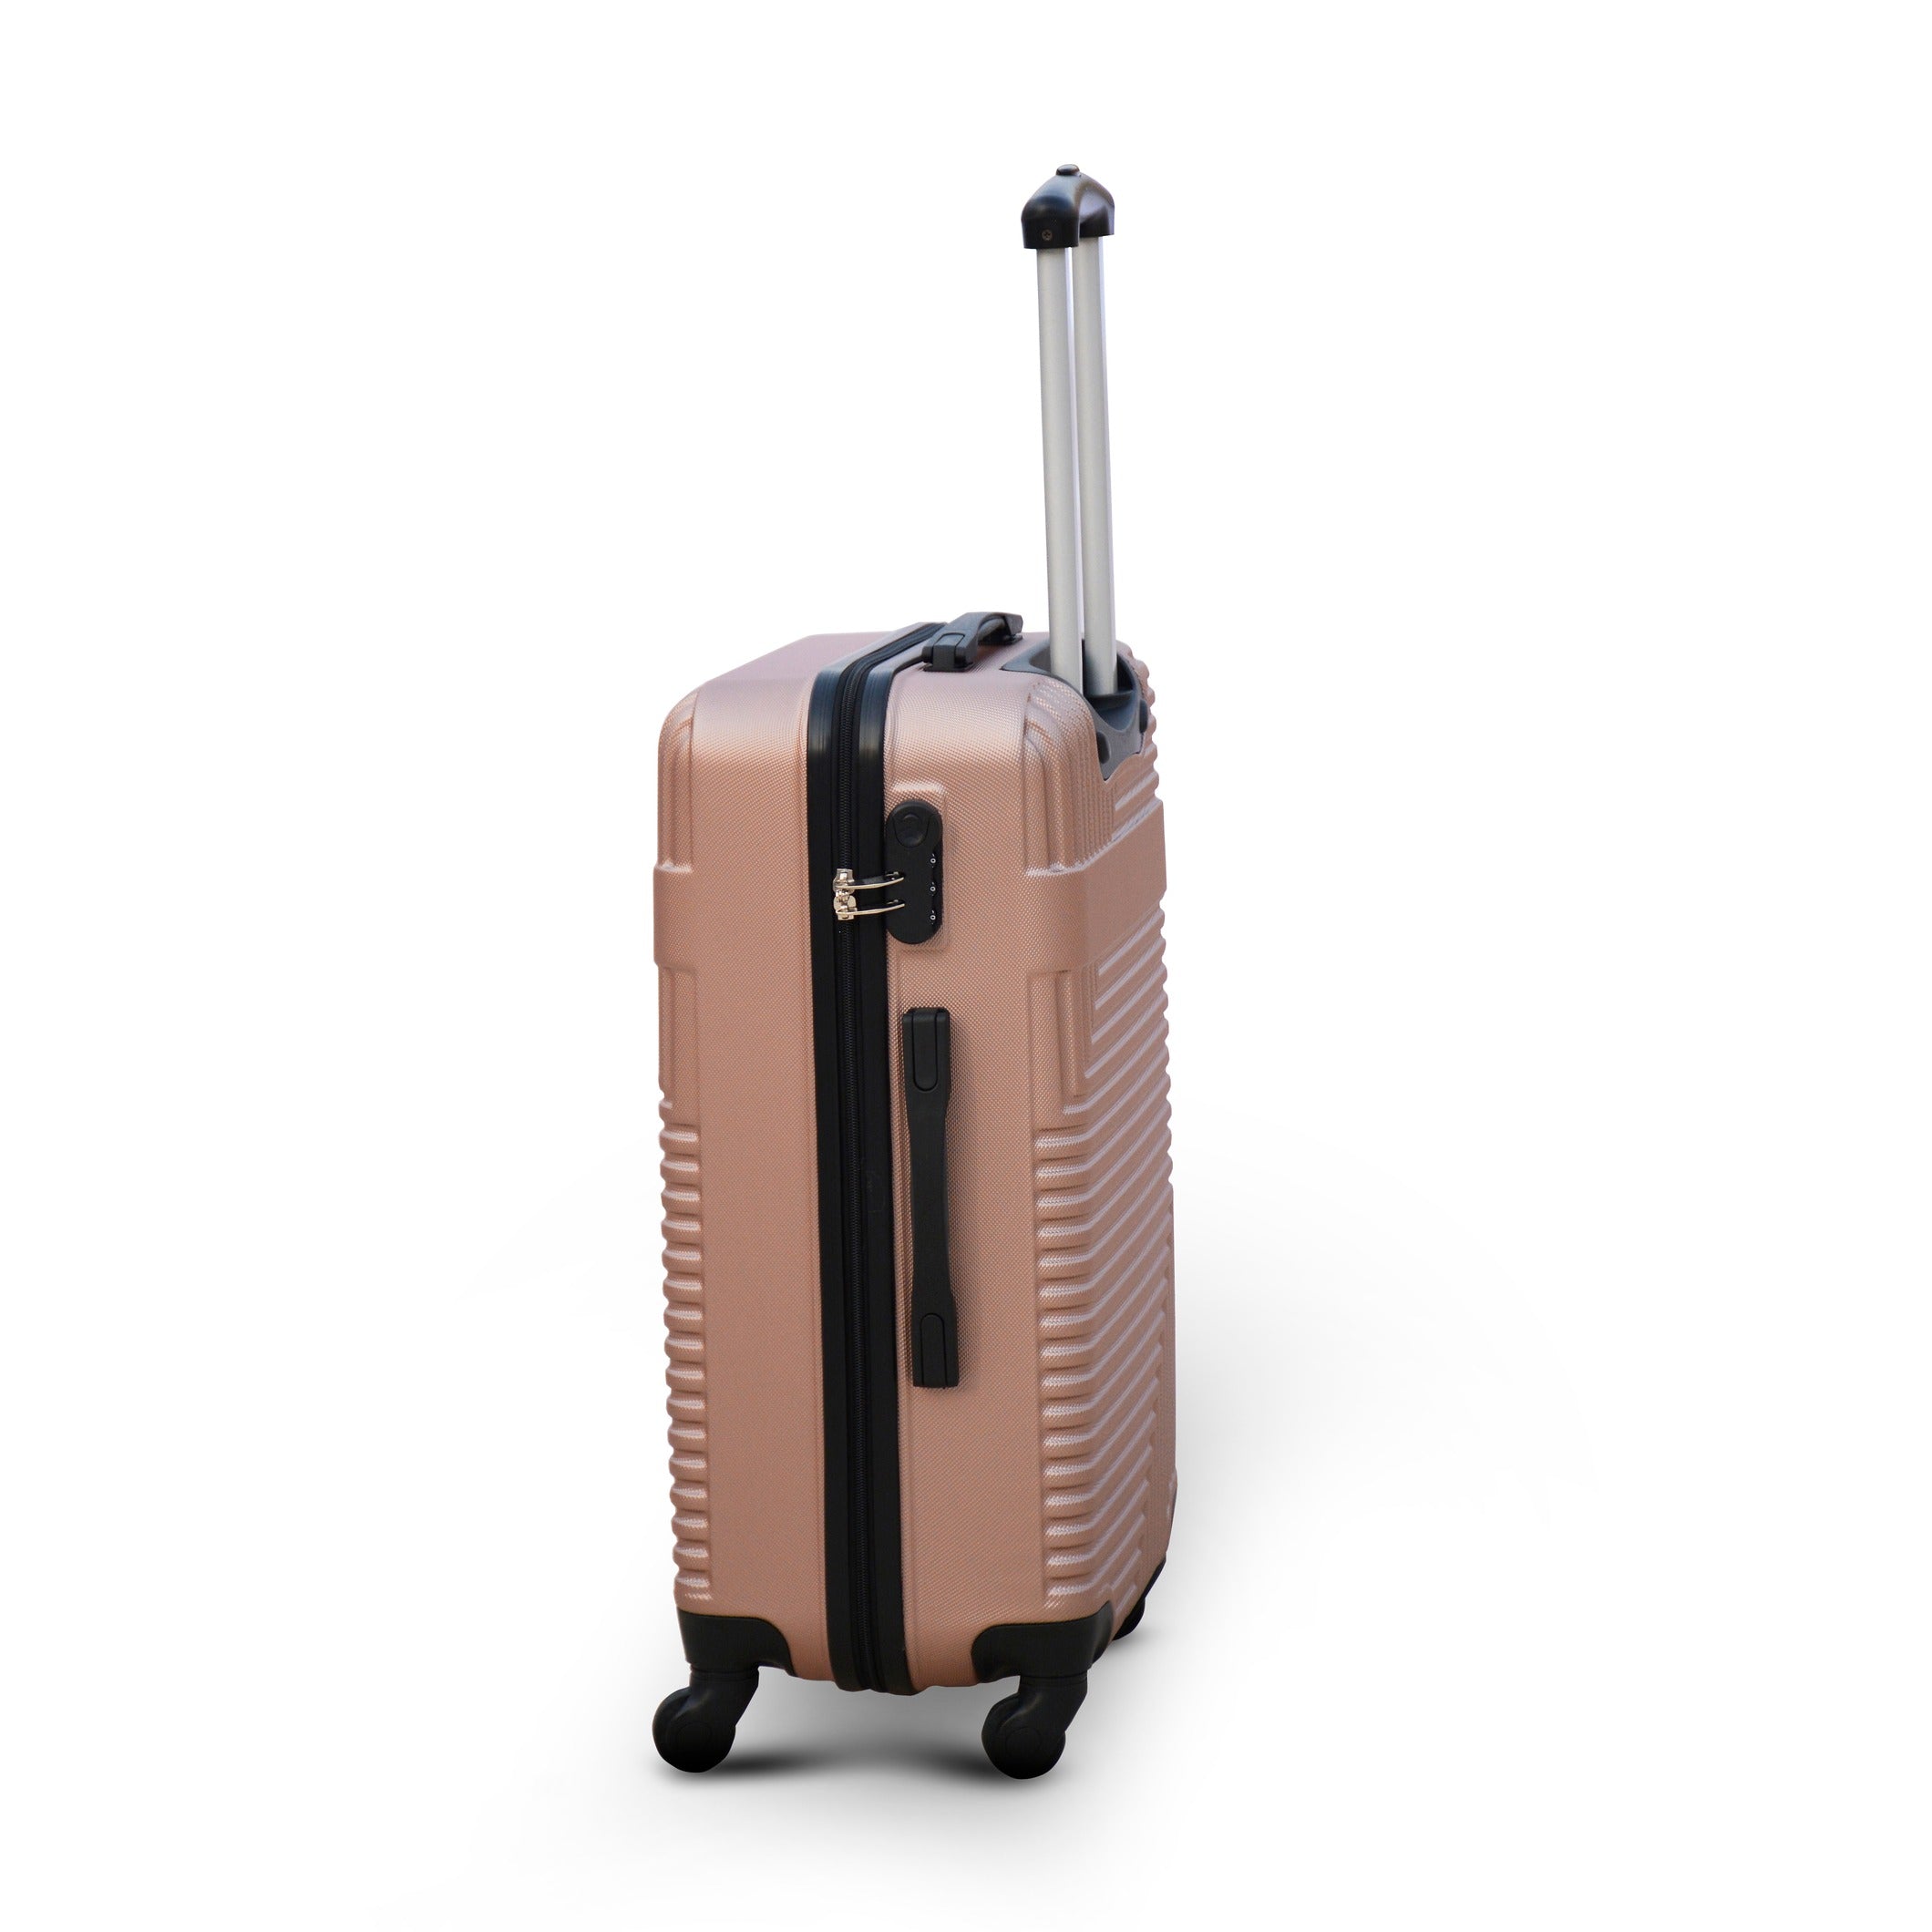 24" Rose Gold Travel Way ABS Lightweight Luggage Bag With Spinner Wheel